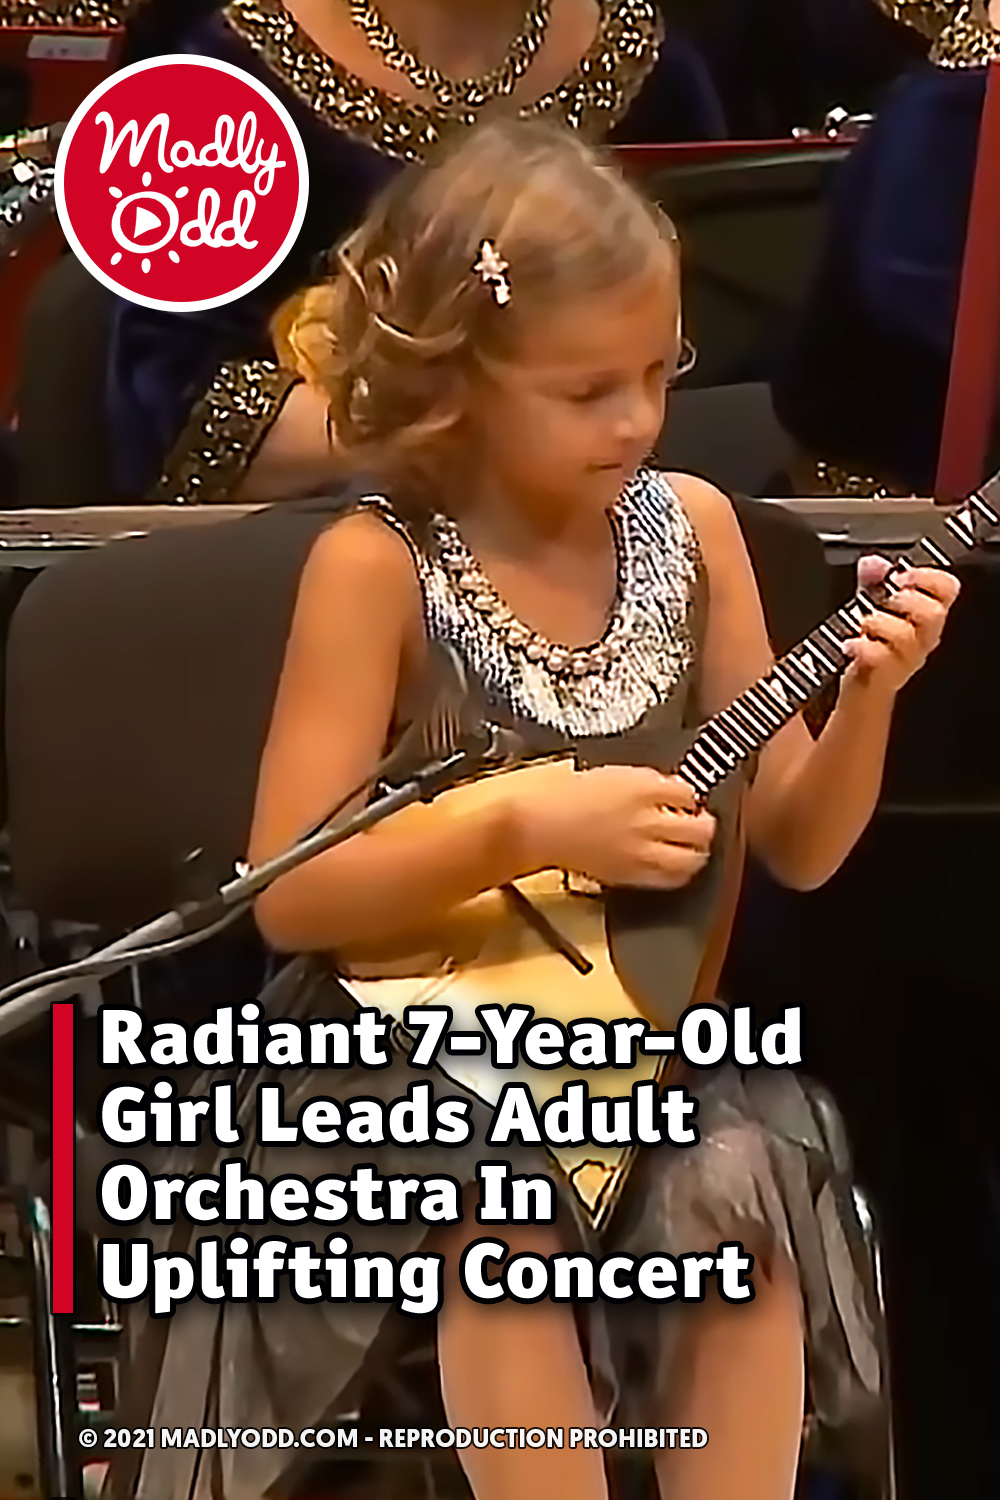 Radiant 7-Year-Old Girl Leads Adult Orchestra In Uplifting Concert